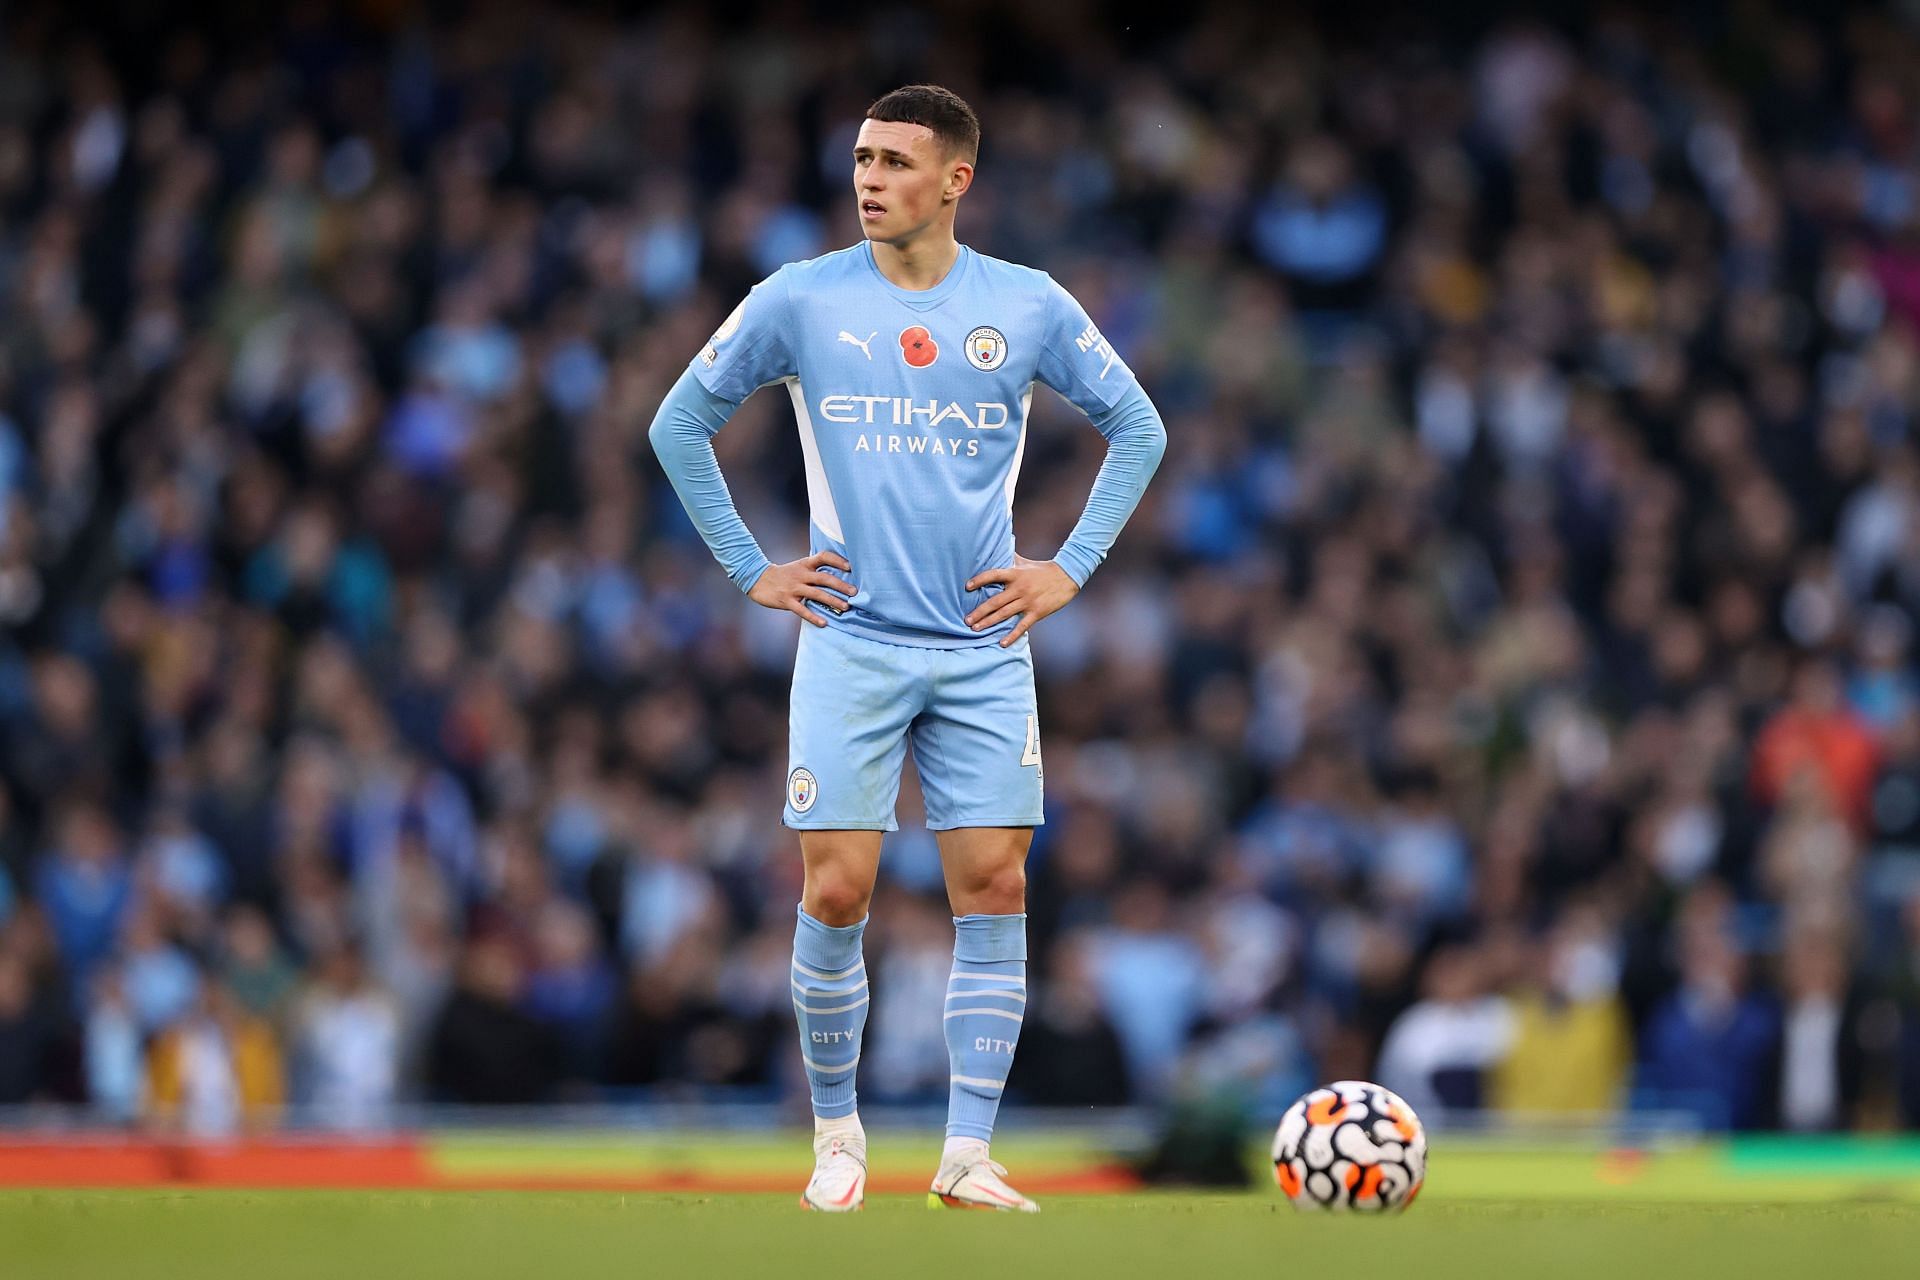 Phil Foden has blossomed into a world-class winger at Manchester City.